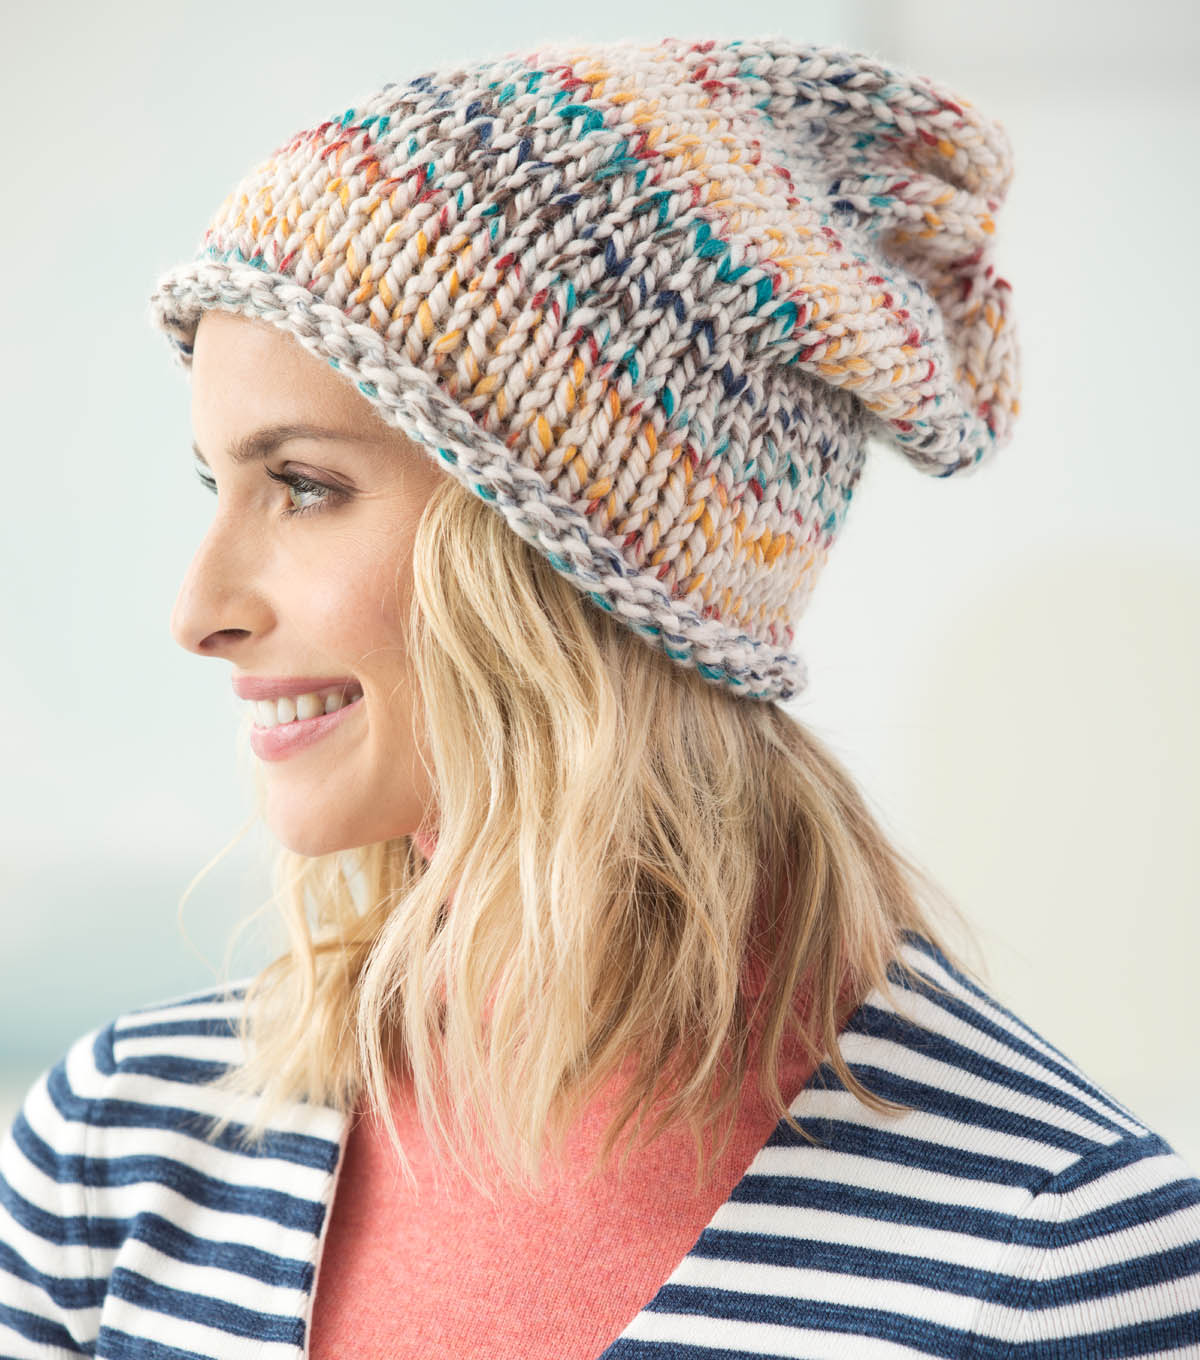 How to knit a simple beanie